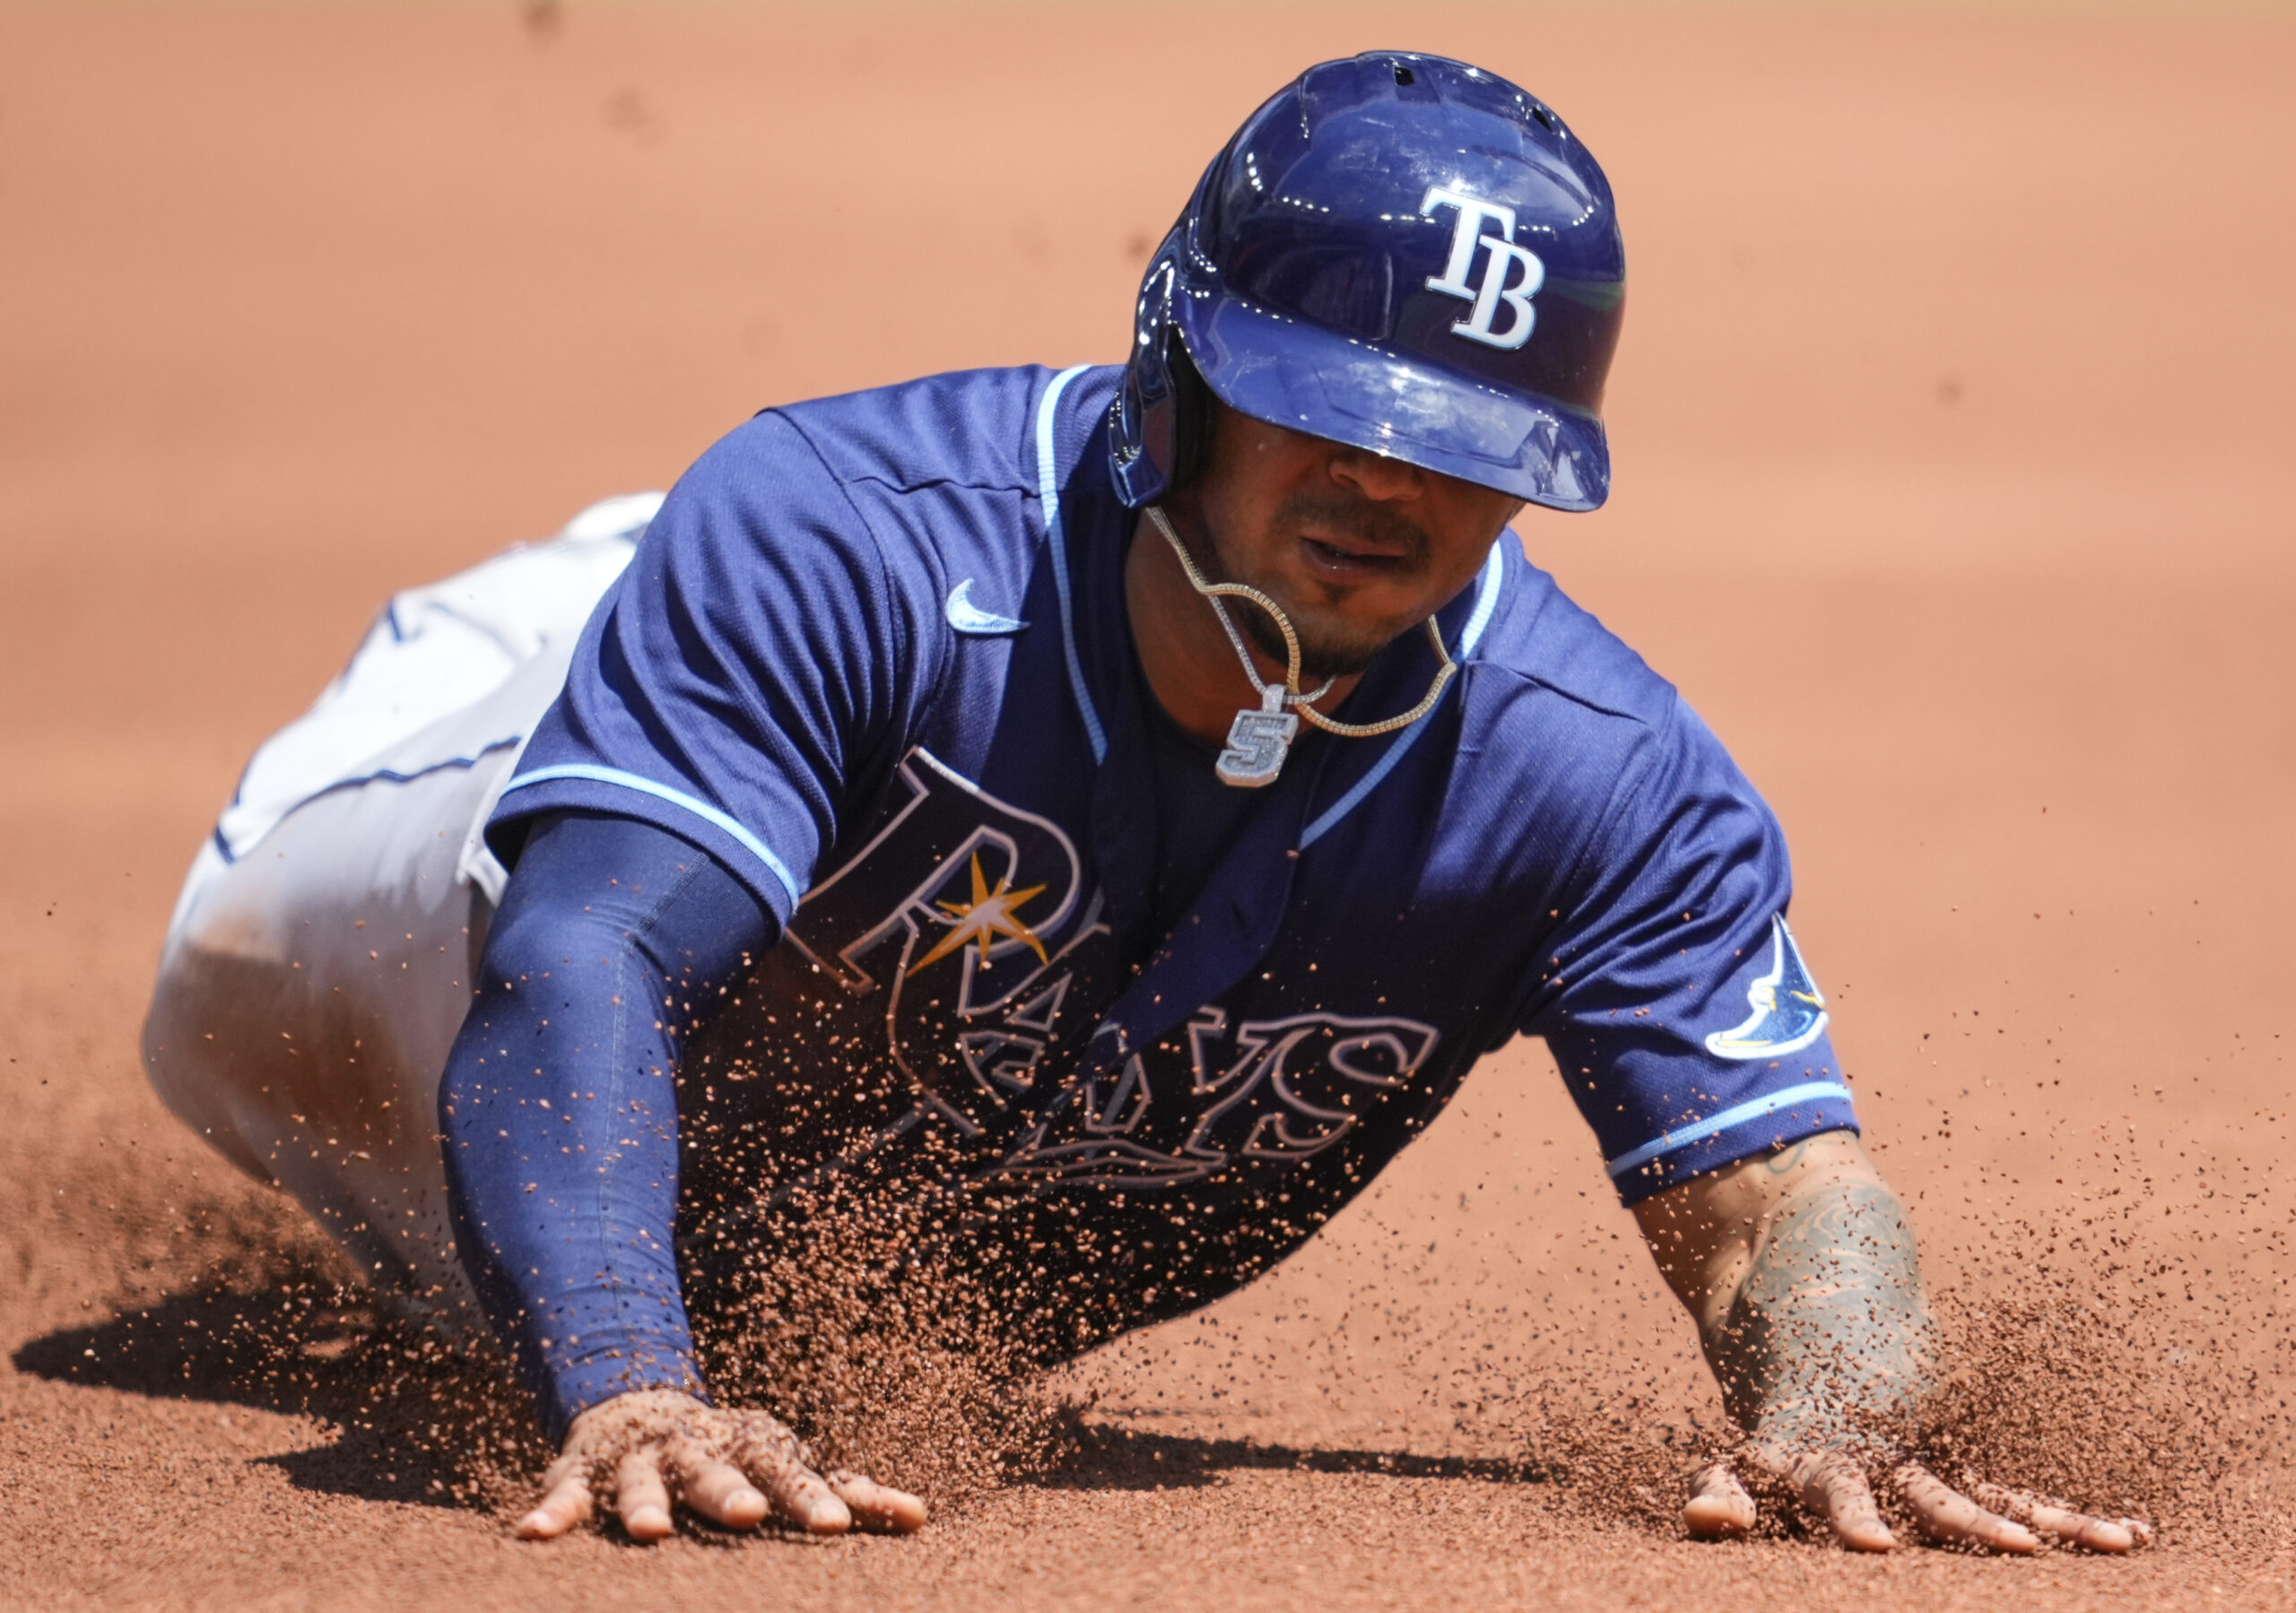 Tampa Bay Rays Wander Franco Robbed Of $650,000 In Jewelry